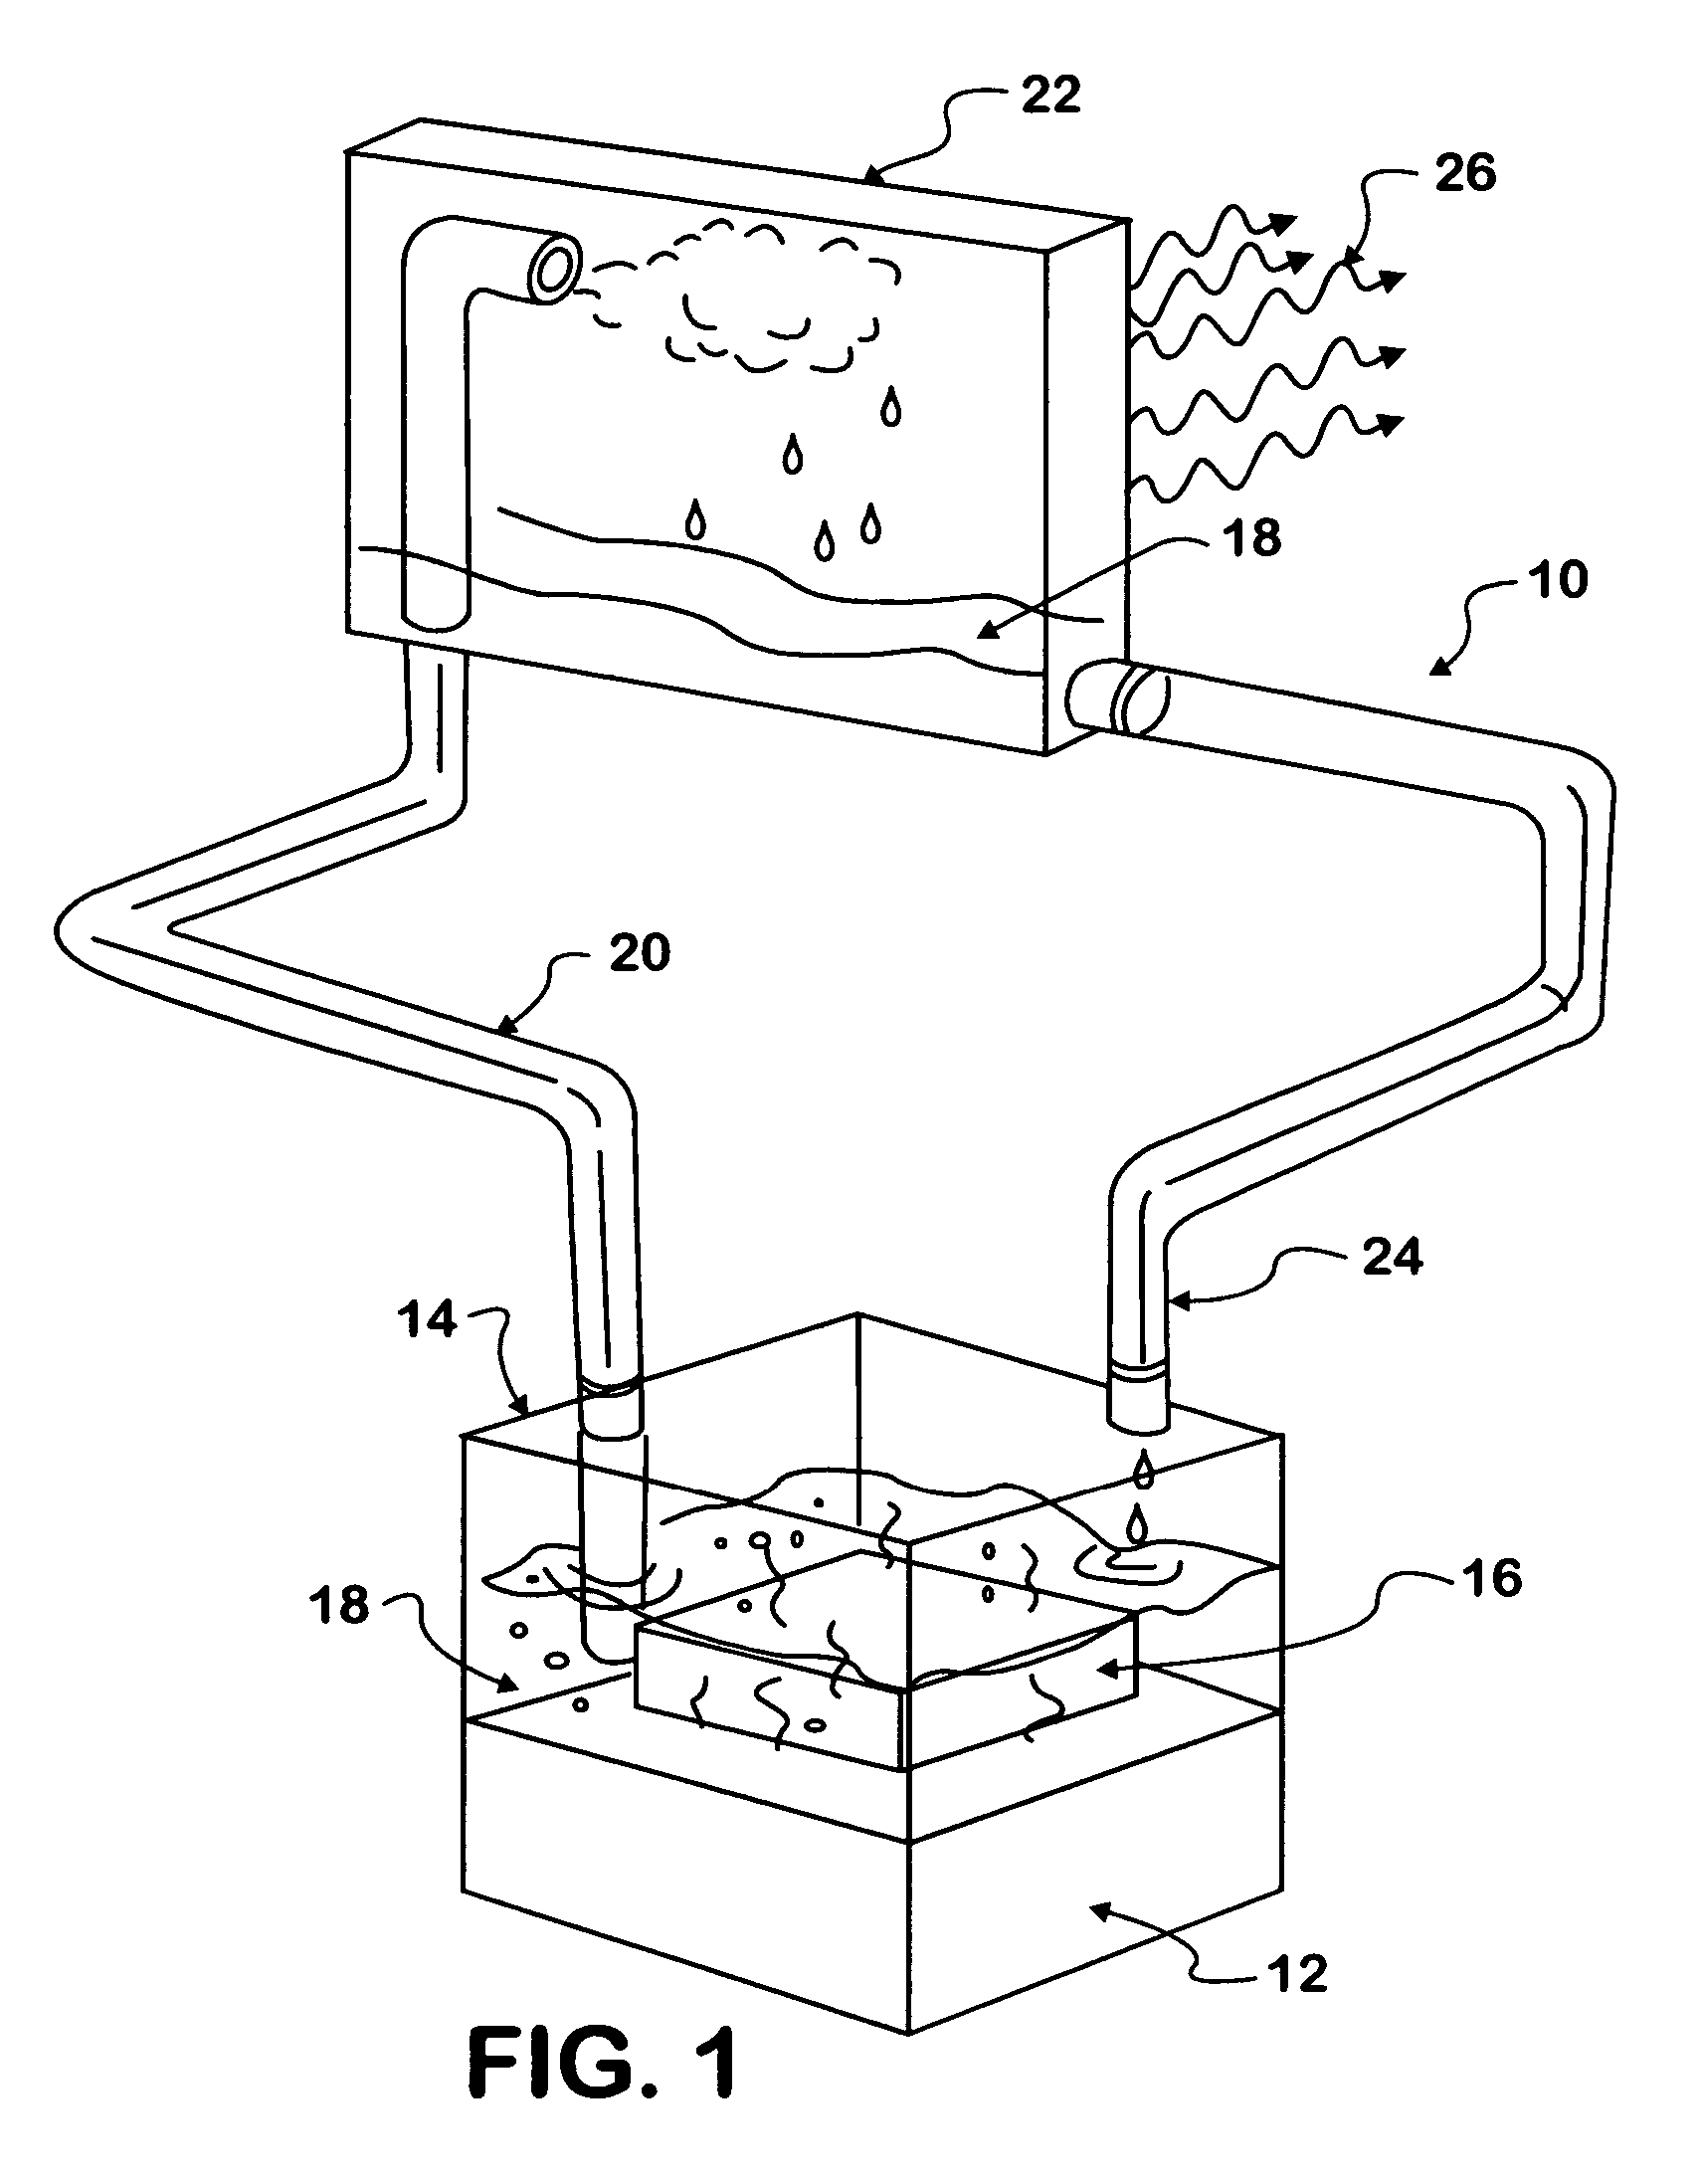 Thermosyphon heat reduction system for a motor vehicle engine compartment